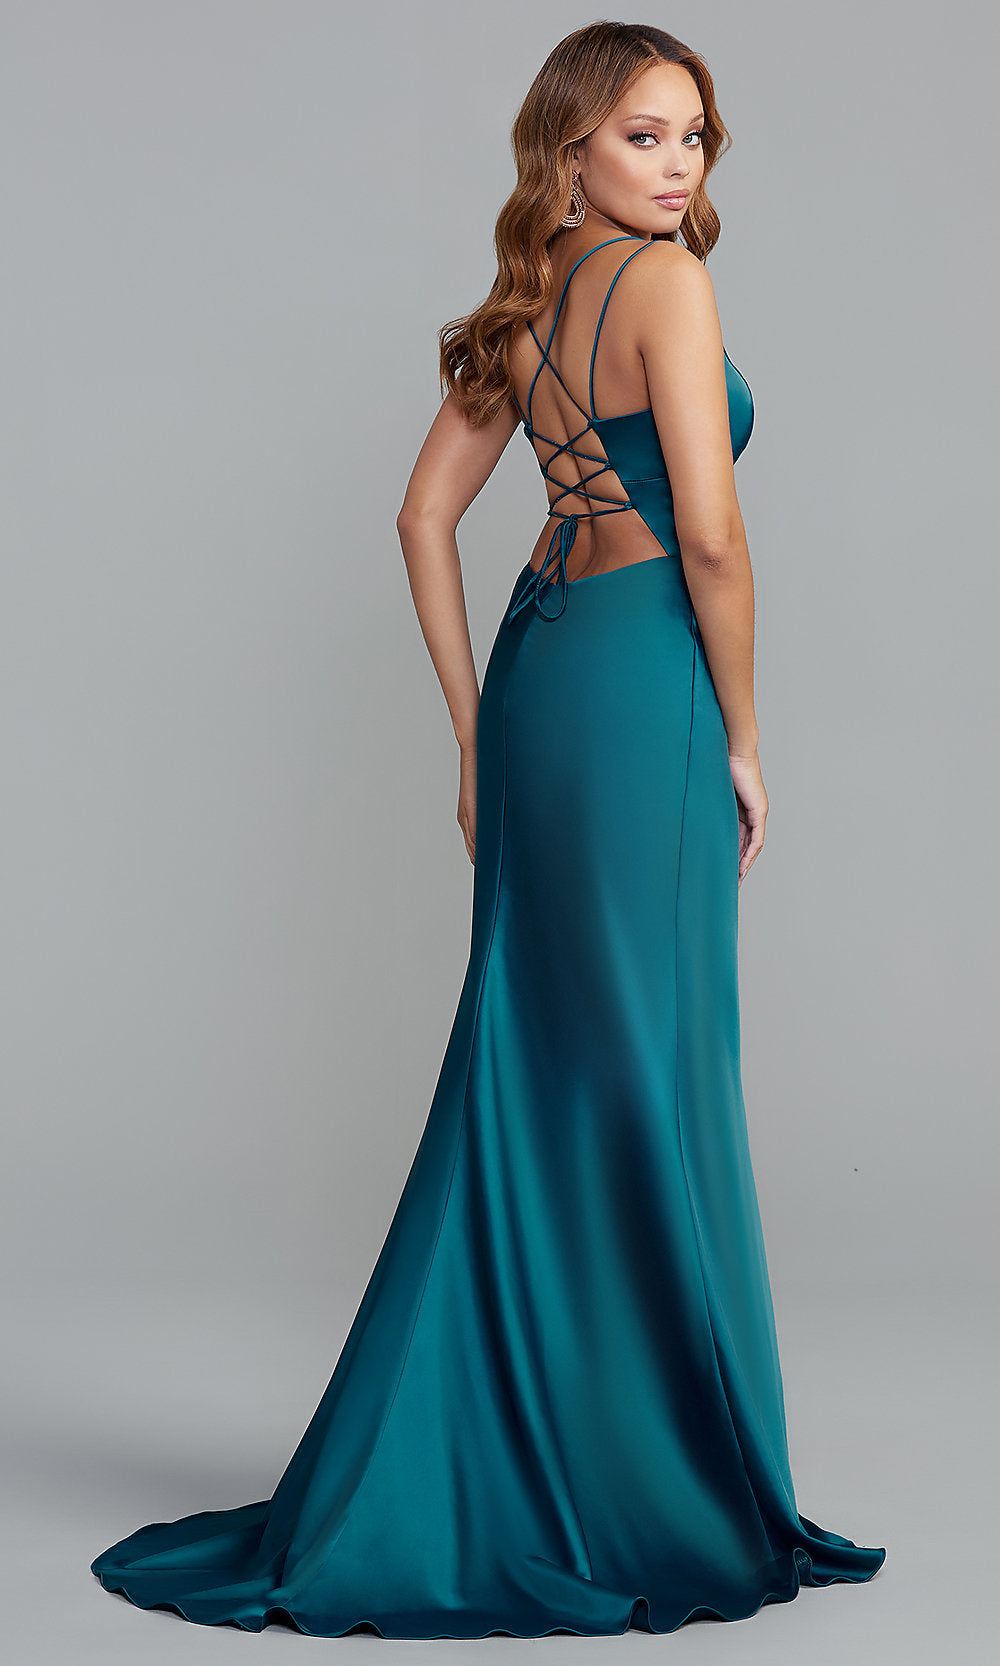  Statement-Back Long Prom Dress in Peacock Blue